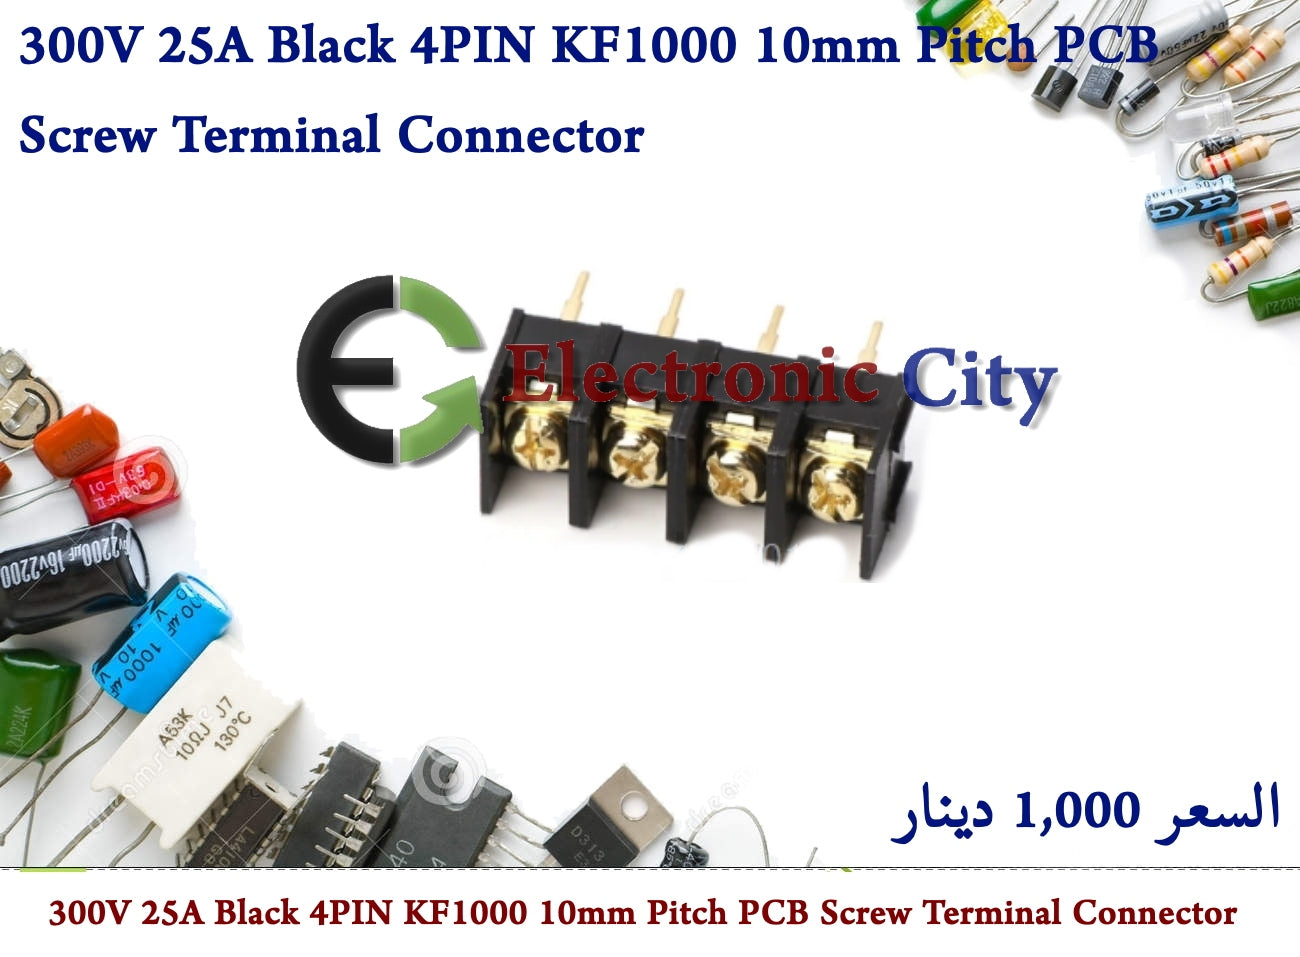 300V 25A Black 4PIN KF1000 10mm Pitch PCB Screw Terminal Connector #T8